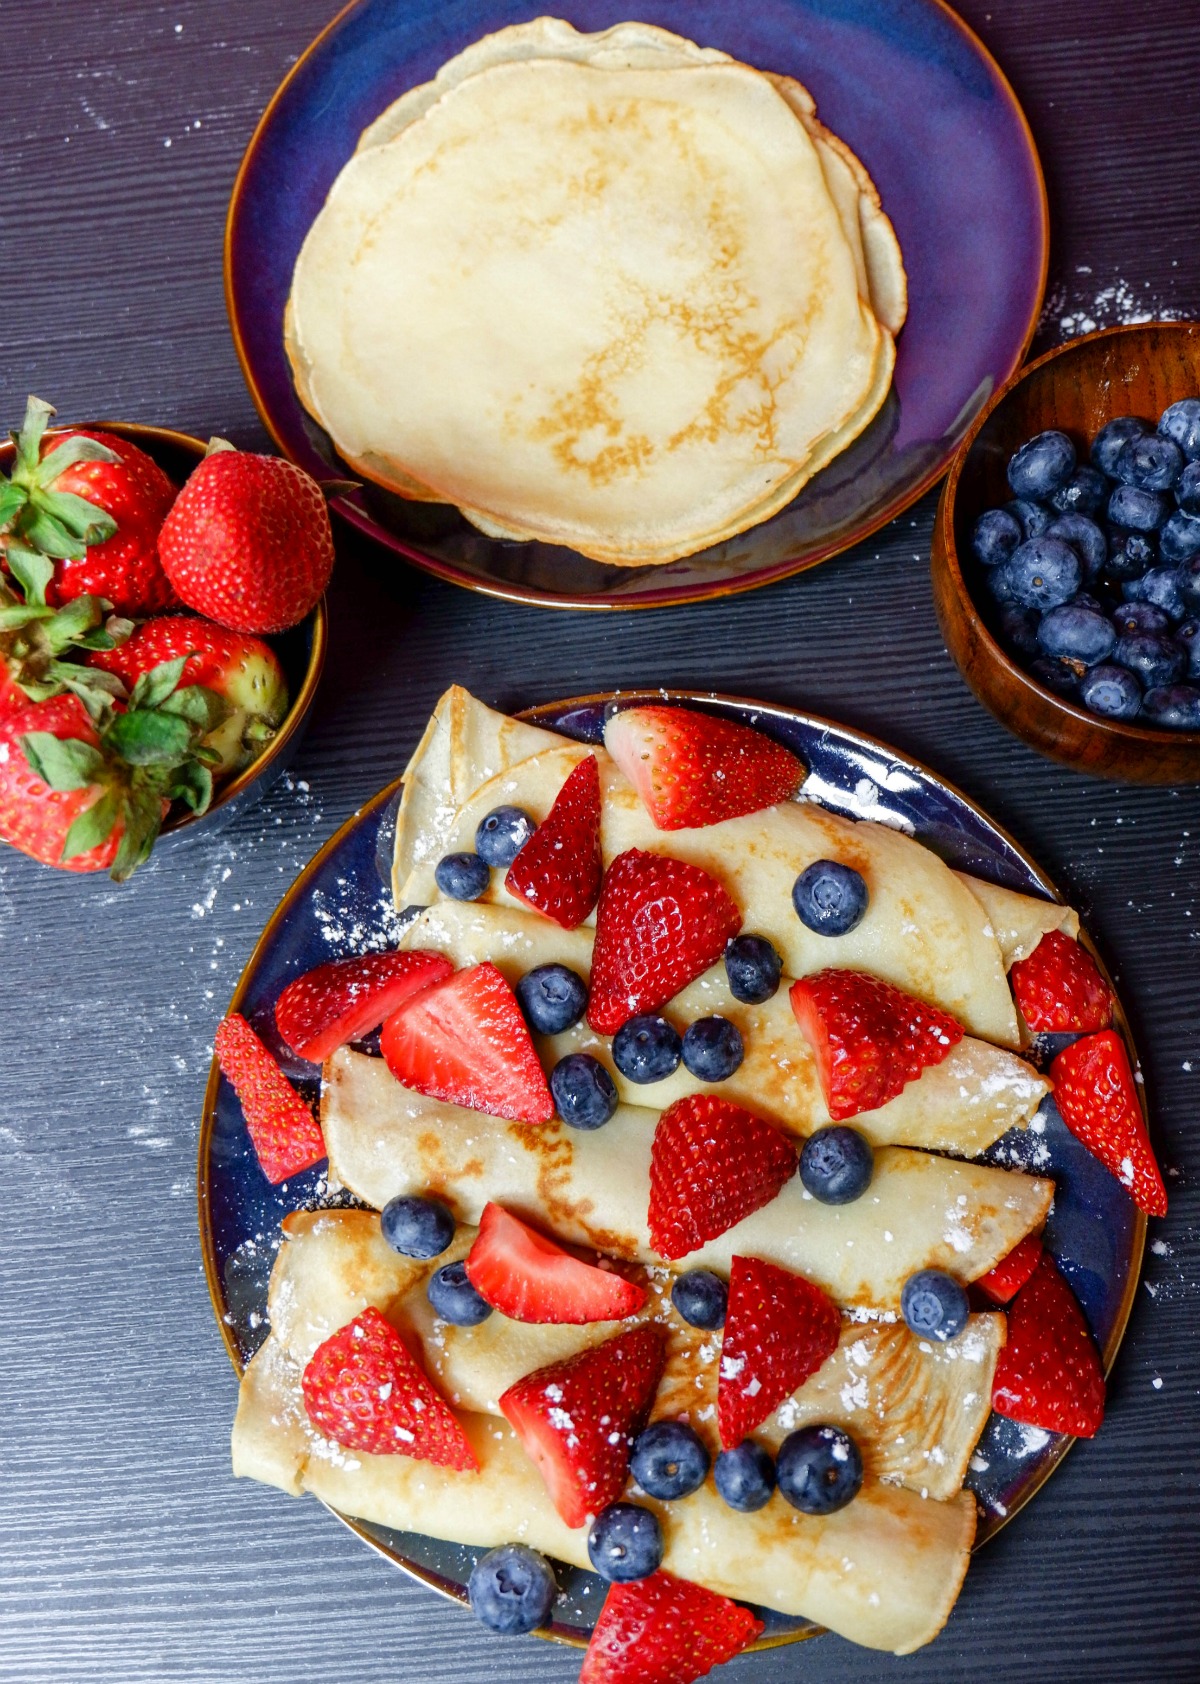 Crepes are delicious to serve for dessert, breakfast or special occasions. Even dinner for savory crepes!